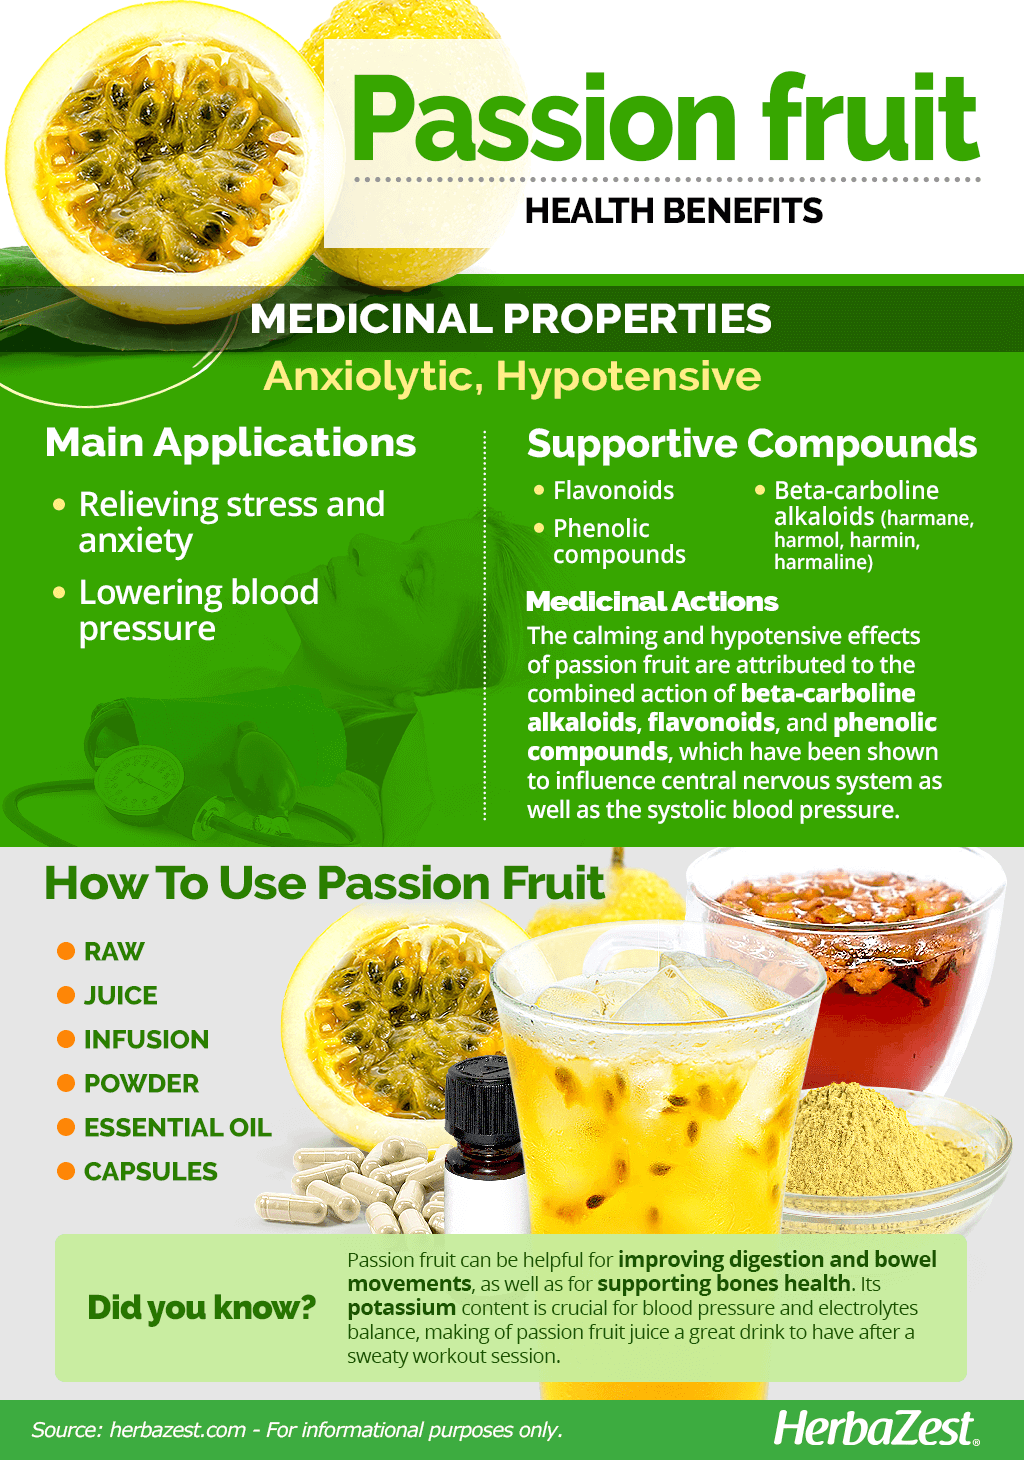 All About Passion Fruit